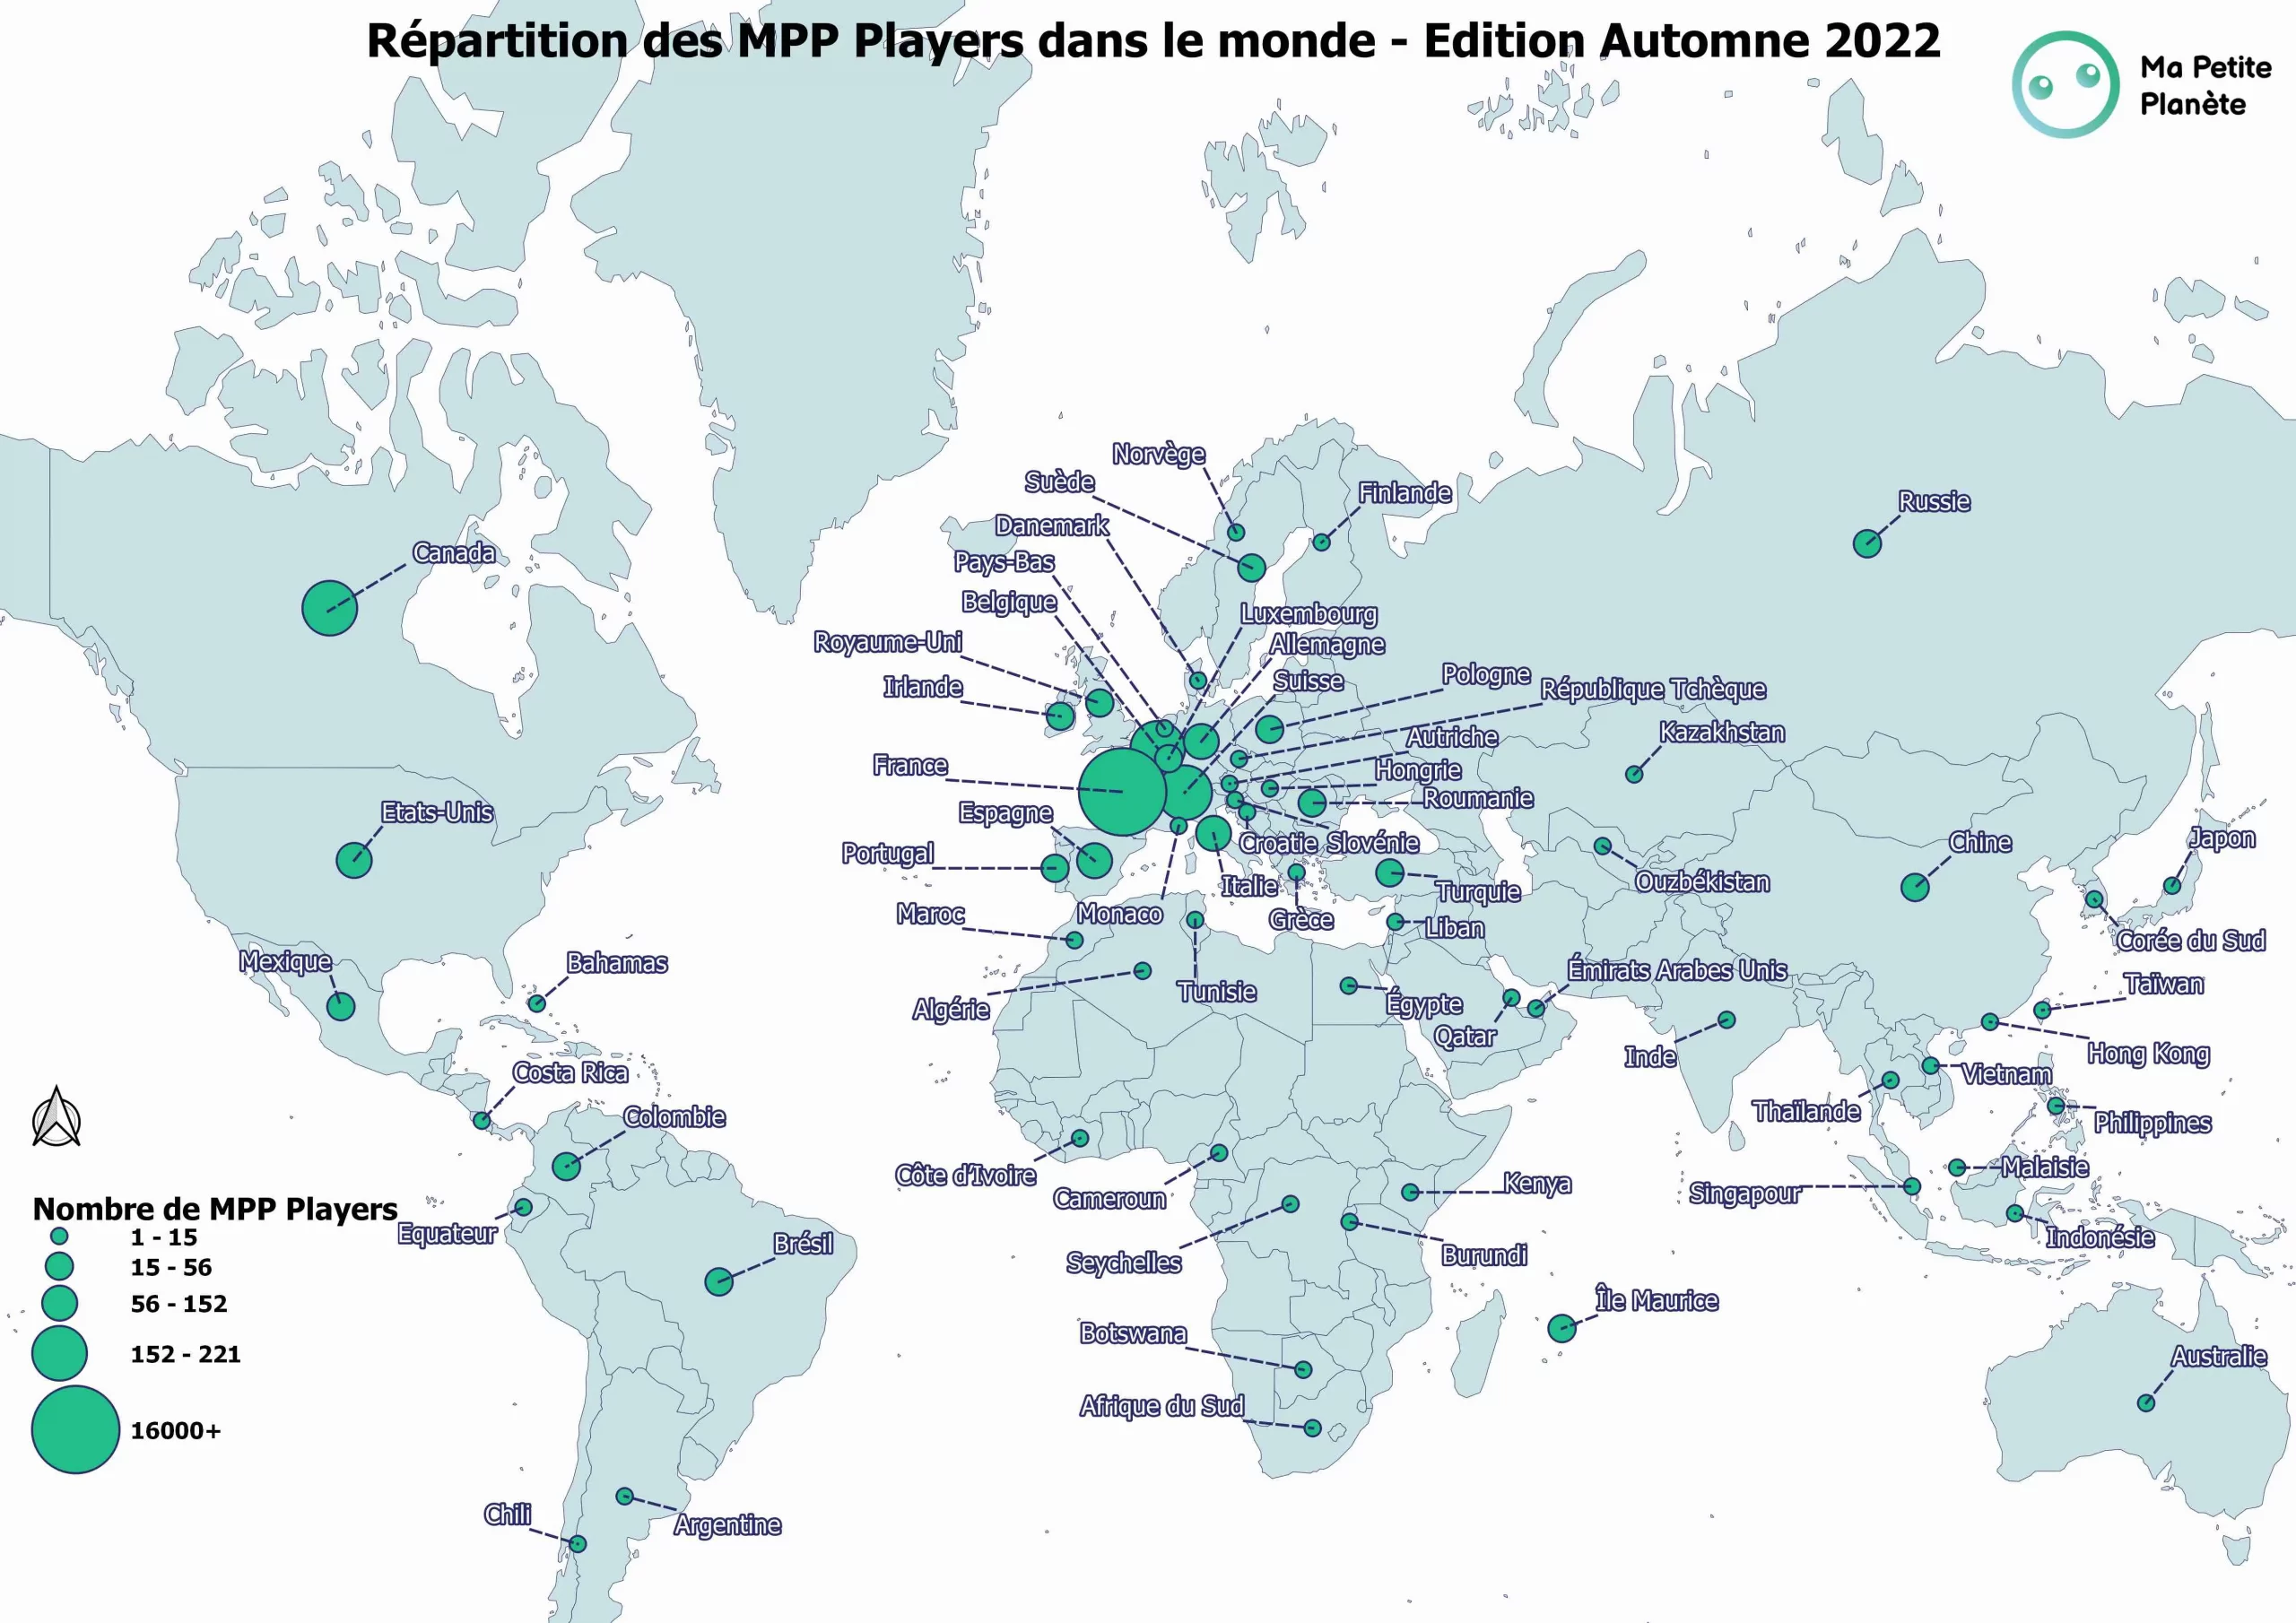 Distribution of MPP Players in the world during the Spring 2022 edition